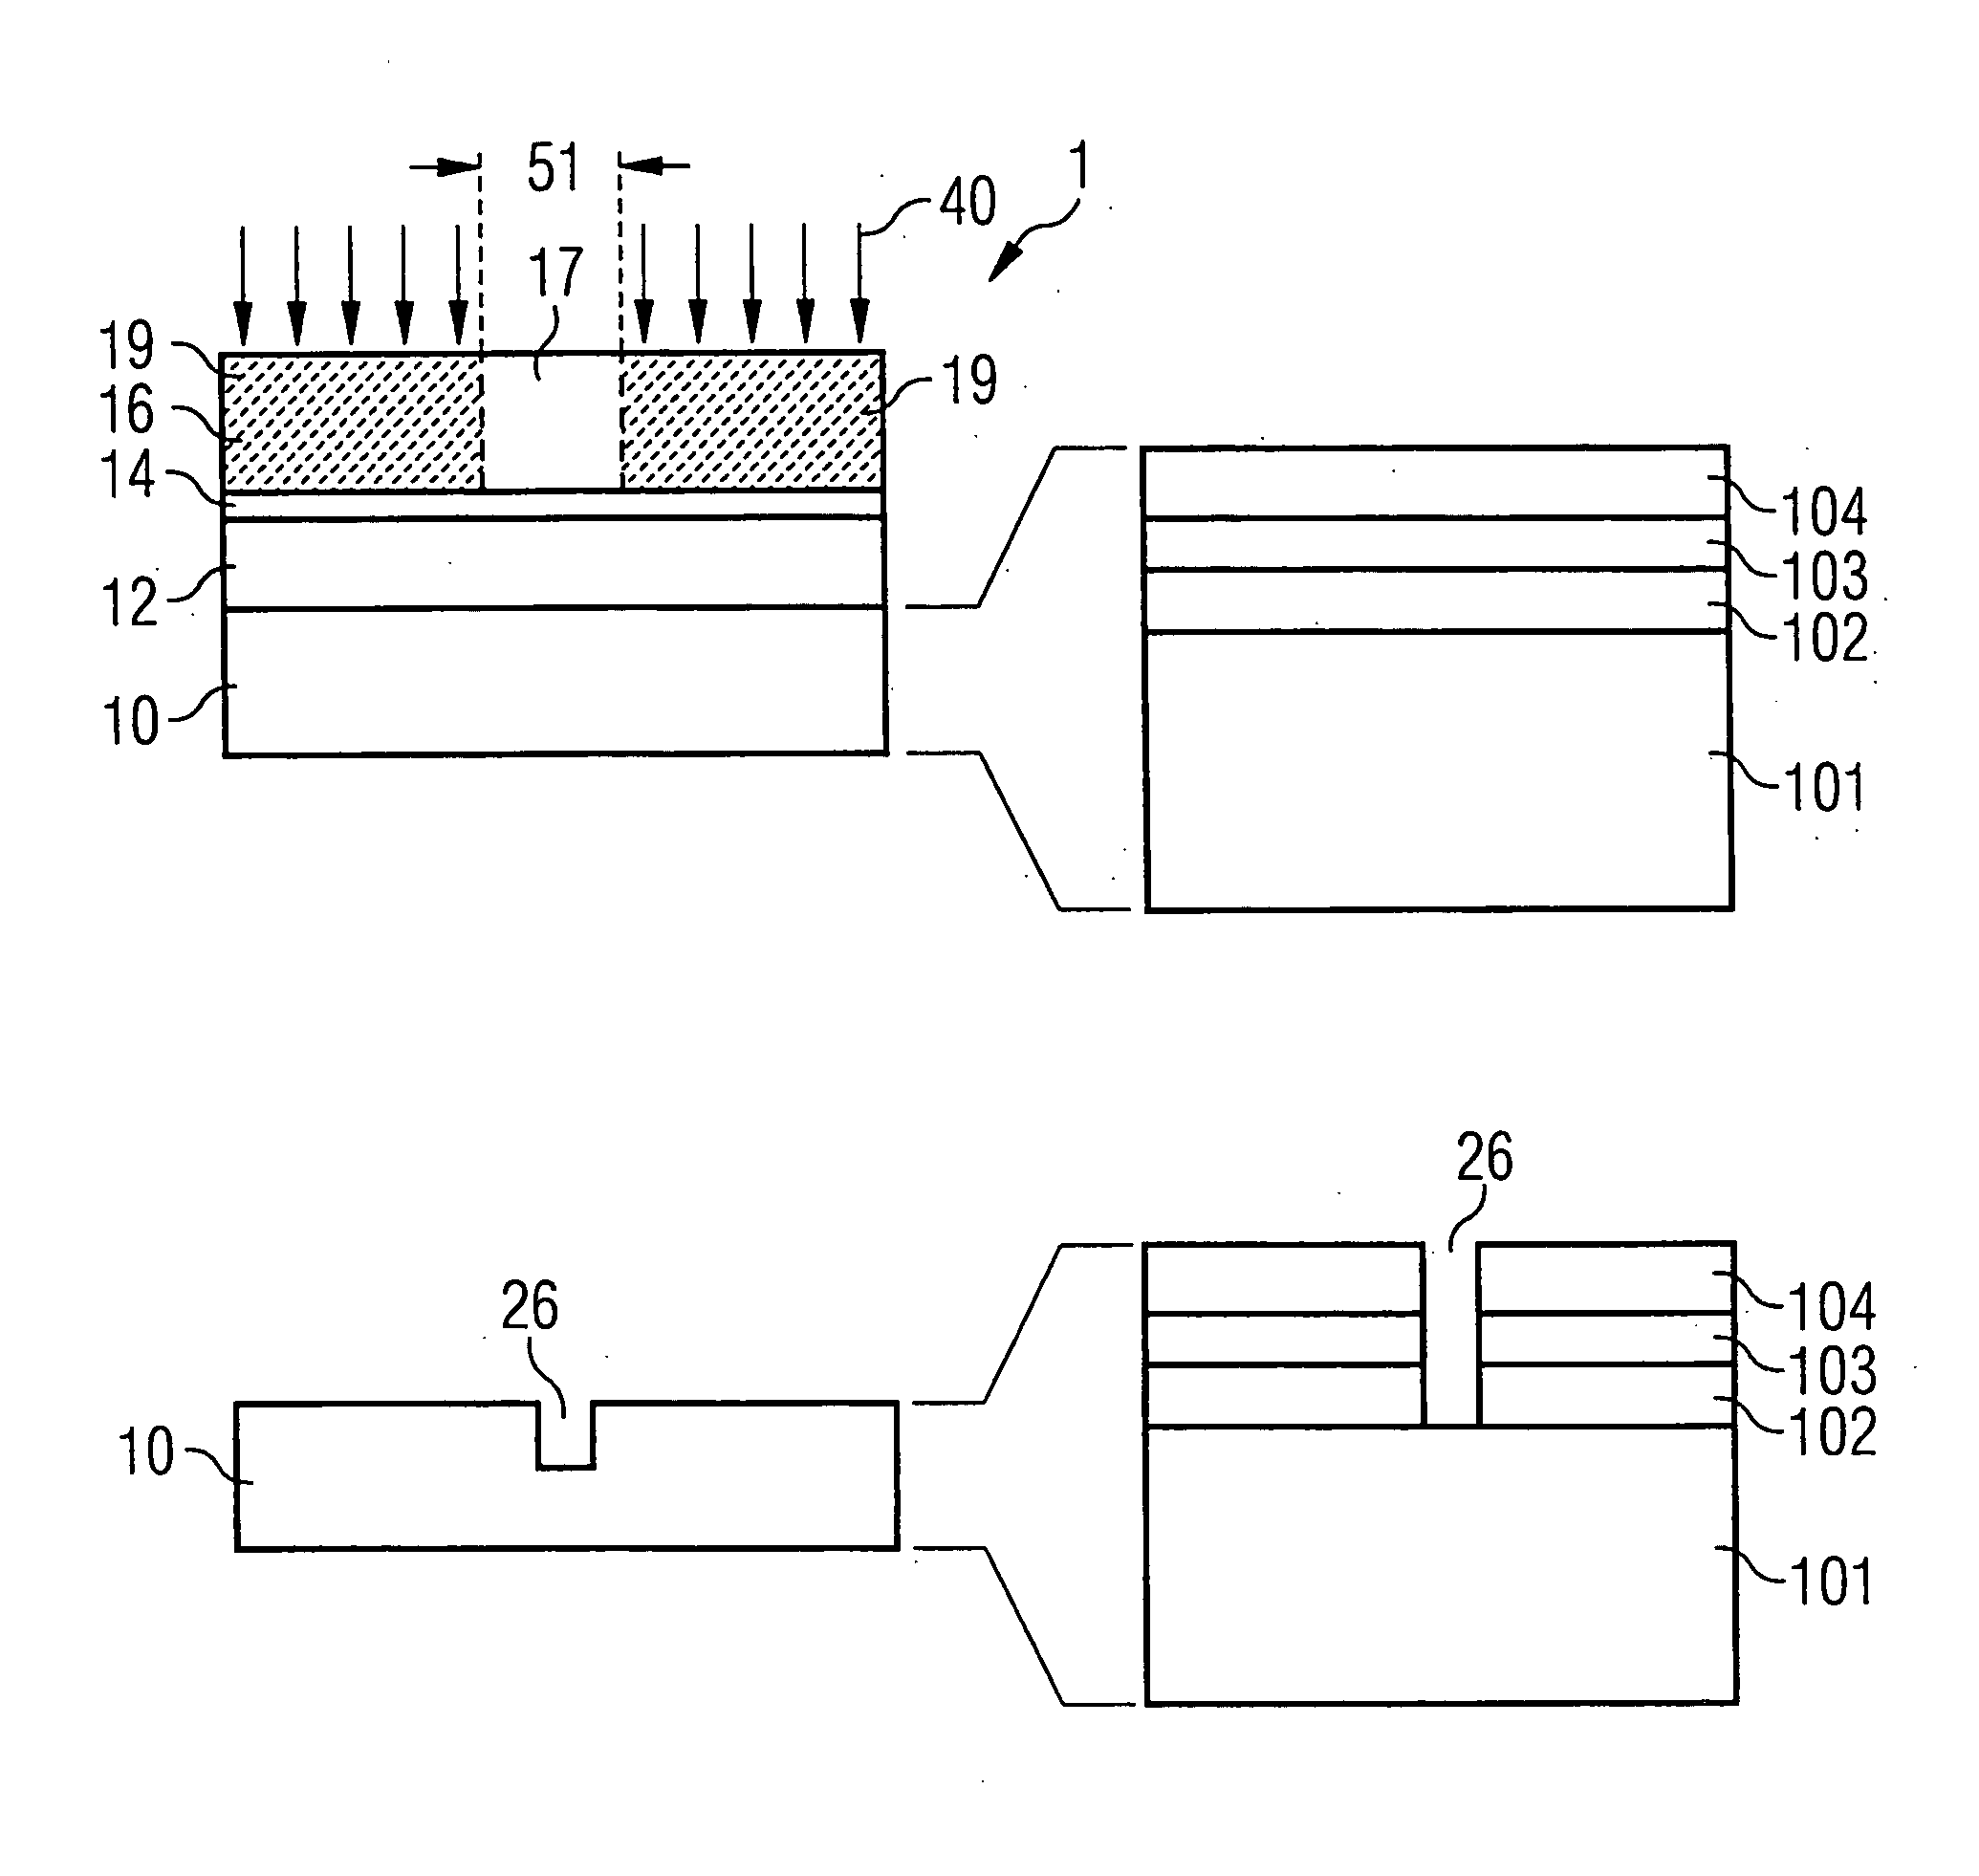 Method for forming a trench in a layer or a layer stack on a semiconductor wafer